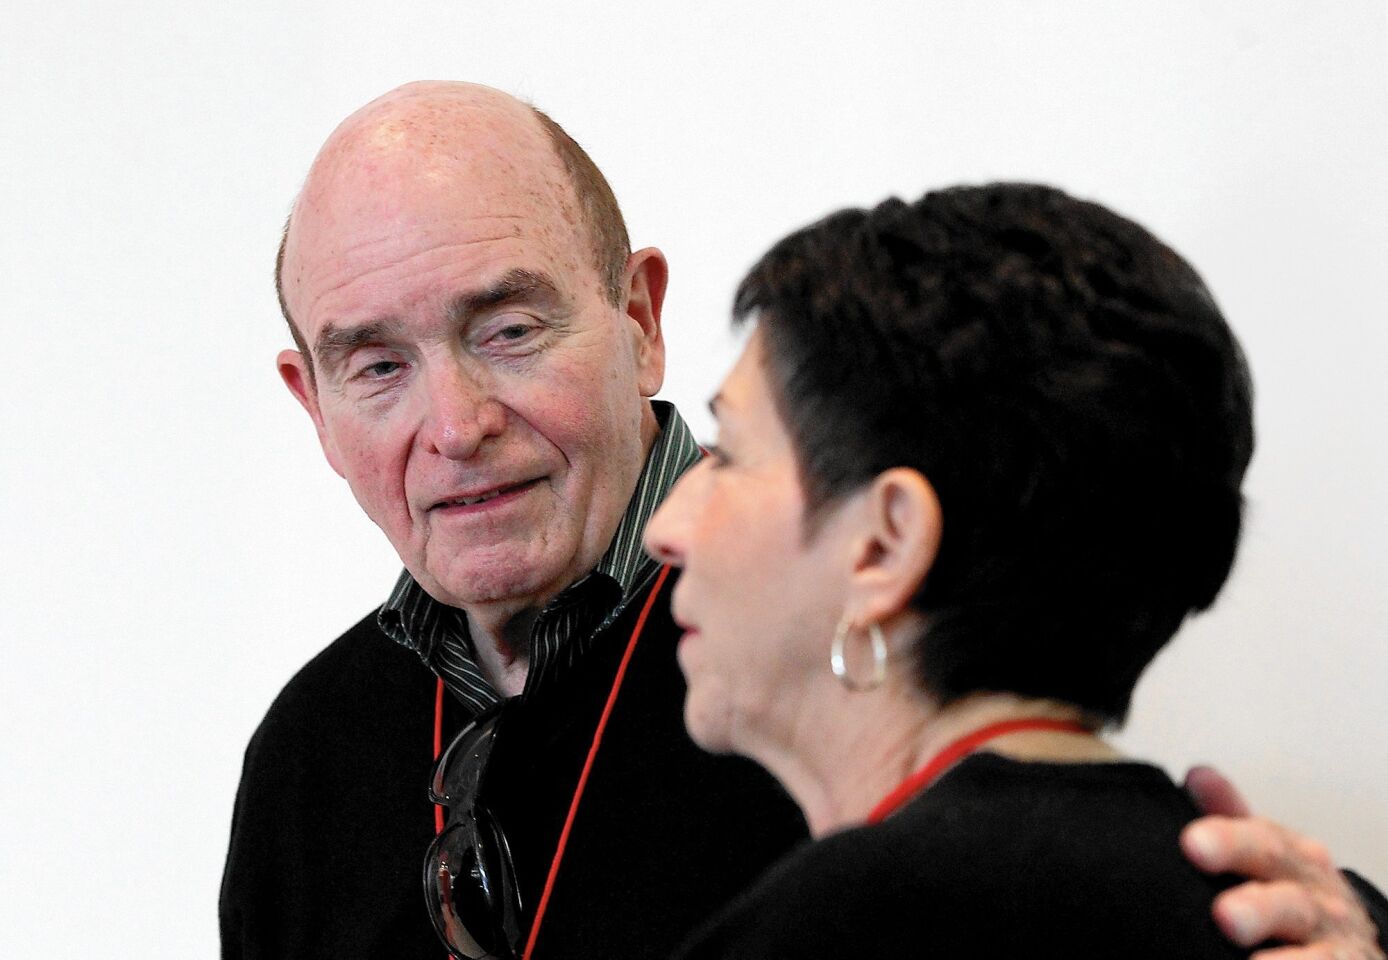 Heart patient Kenneth Keefe and his wife Silvia, of Huntington Beach, talk about the new heart valve that saved his life during Edward Lifesciences Patient Day on Friday in Irvine.